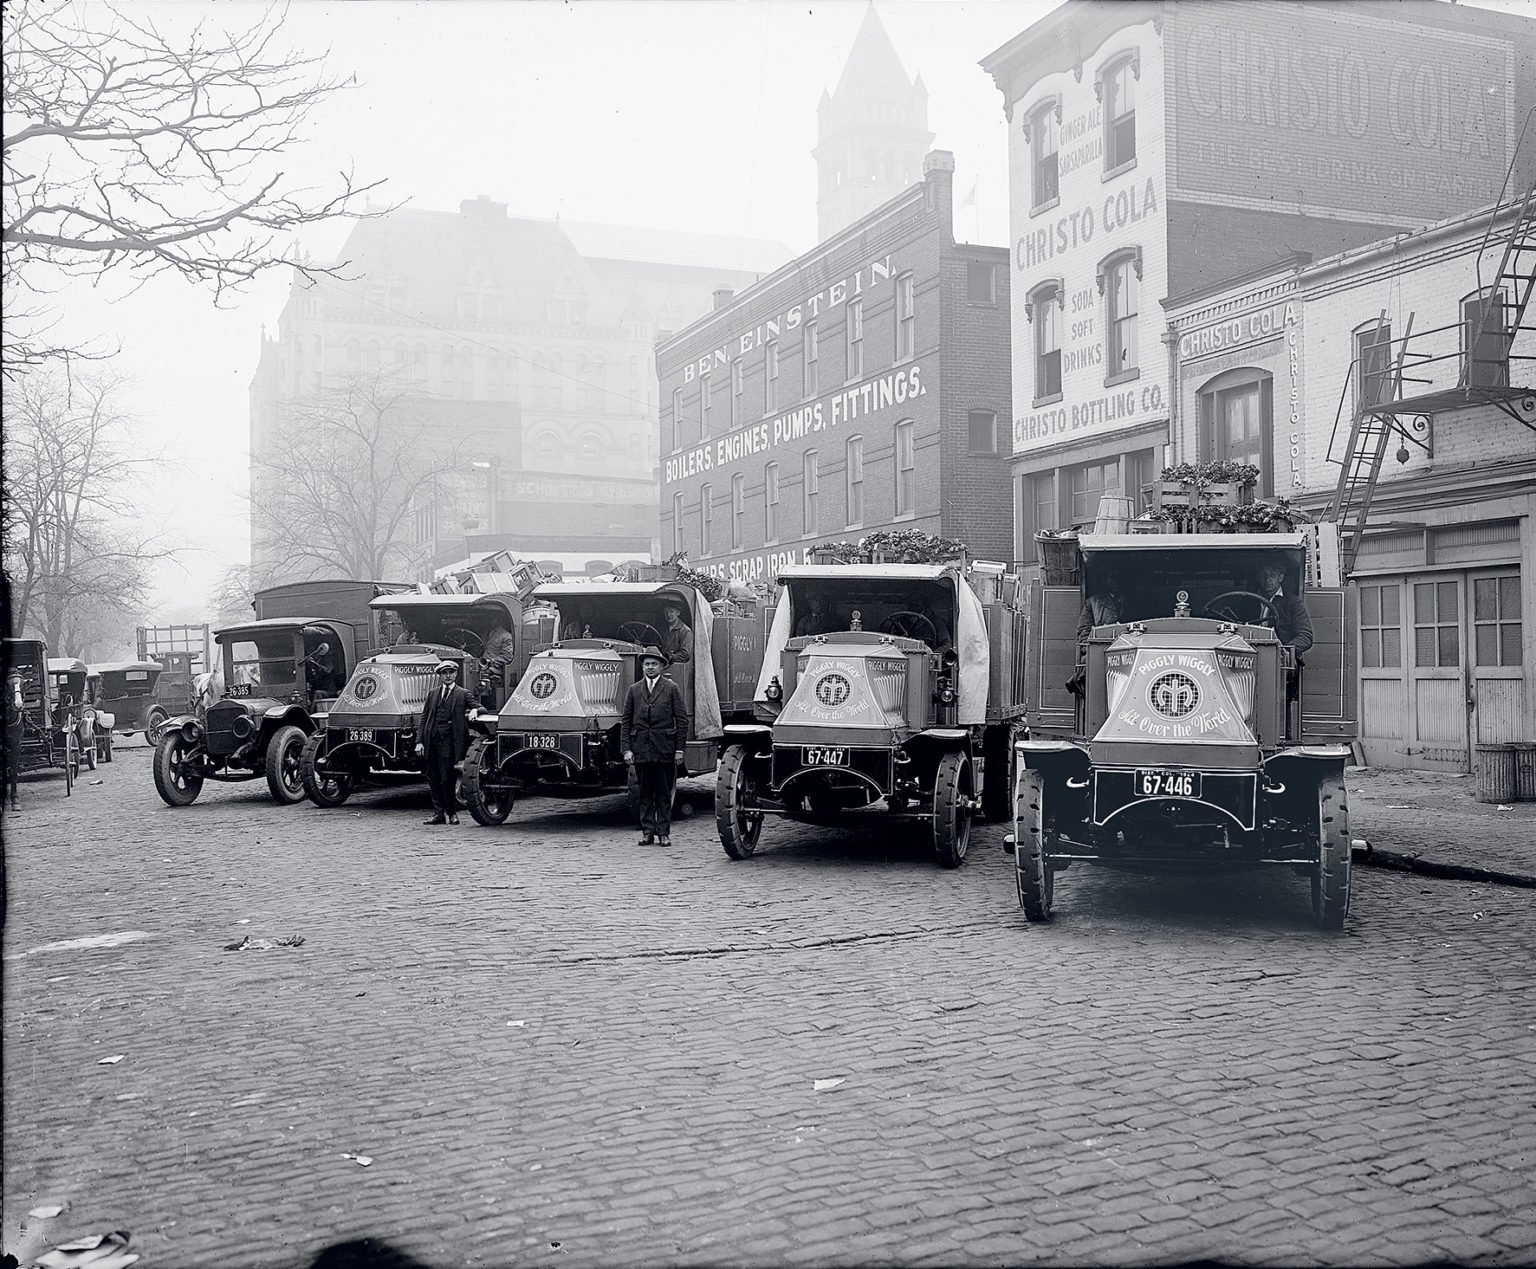 An early-1900s delivery. Photograph by George Rinhart/Corbis via Getty Images.